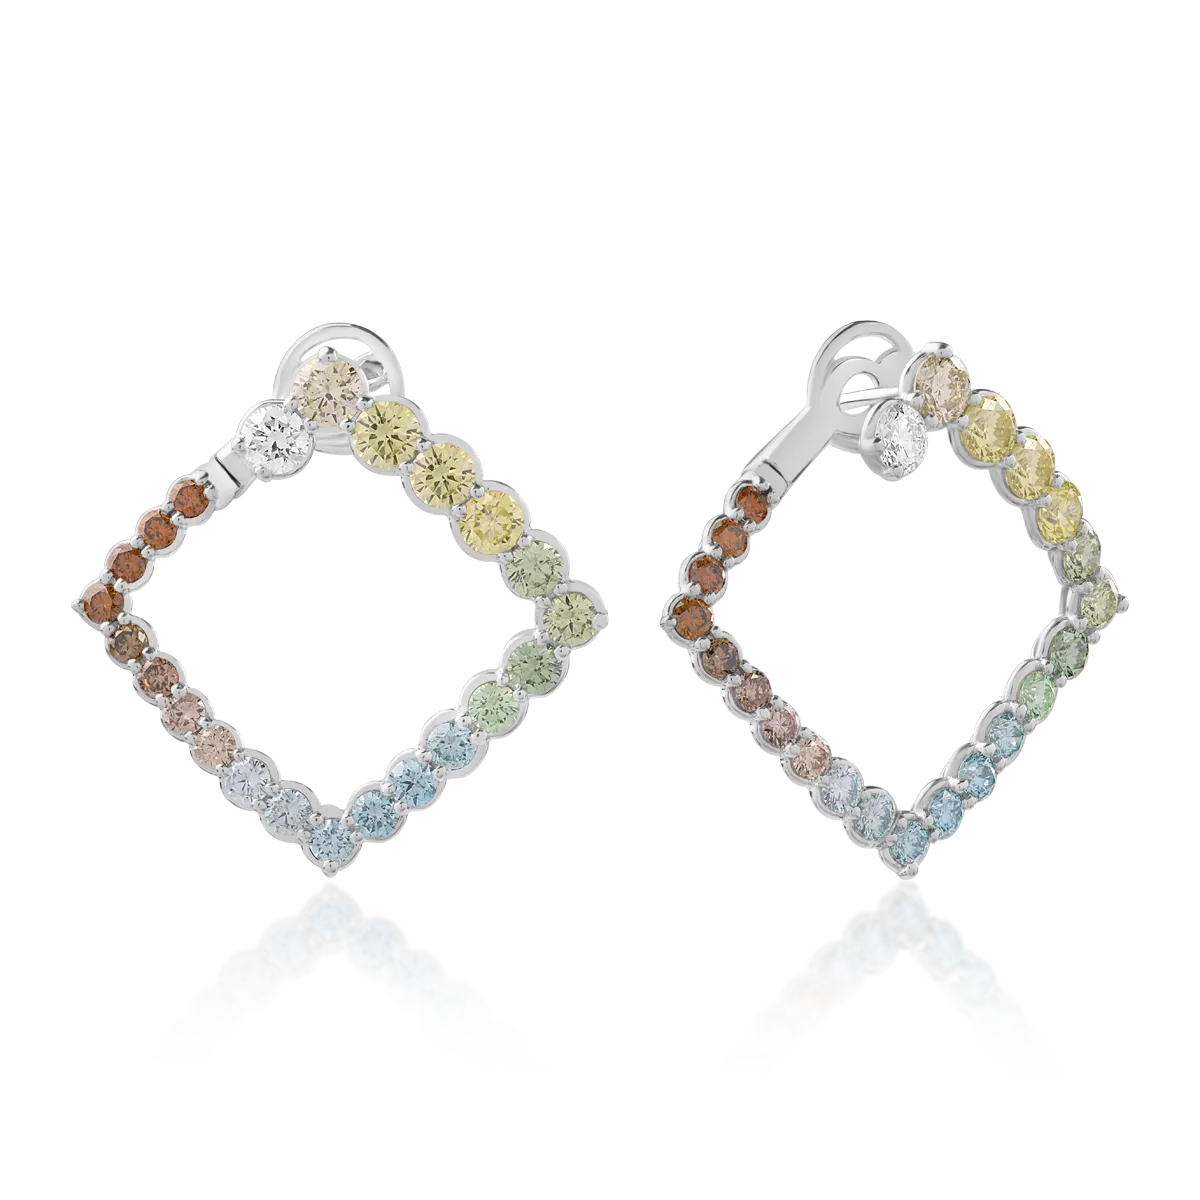 18K white gold earrings with 3.27ct colored diamonds